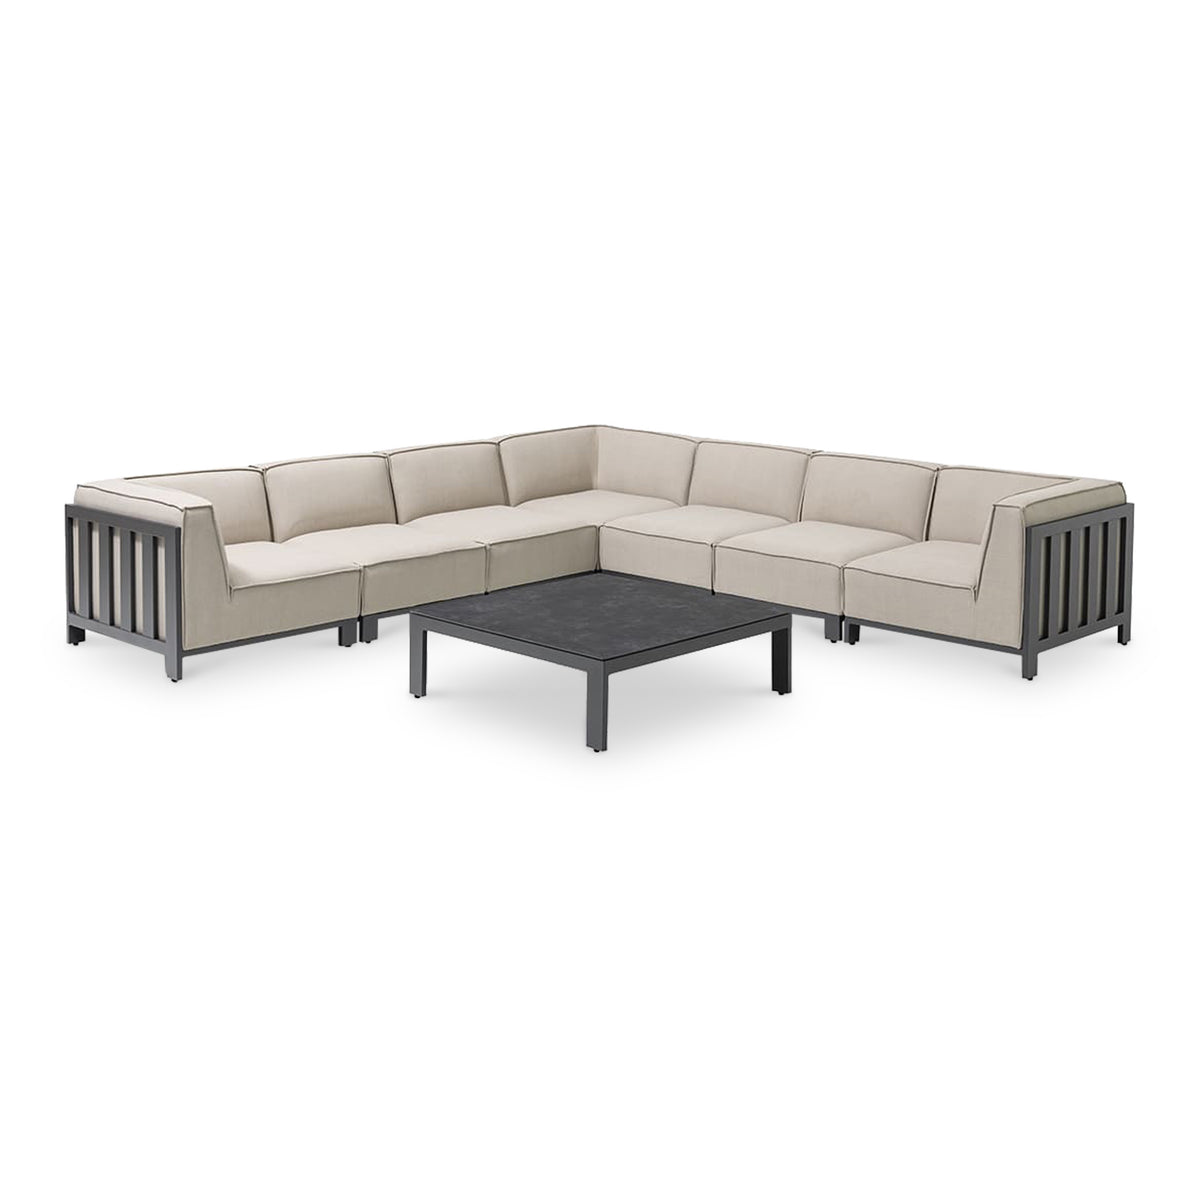 Maze Ibiza Large Outdoor Corner Sofa Set With Square Table from Roseland Furniture